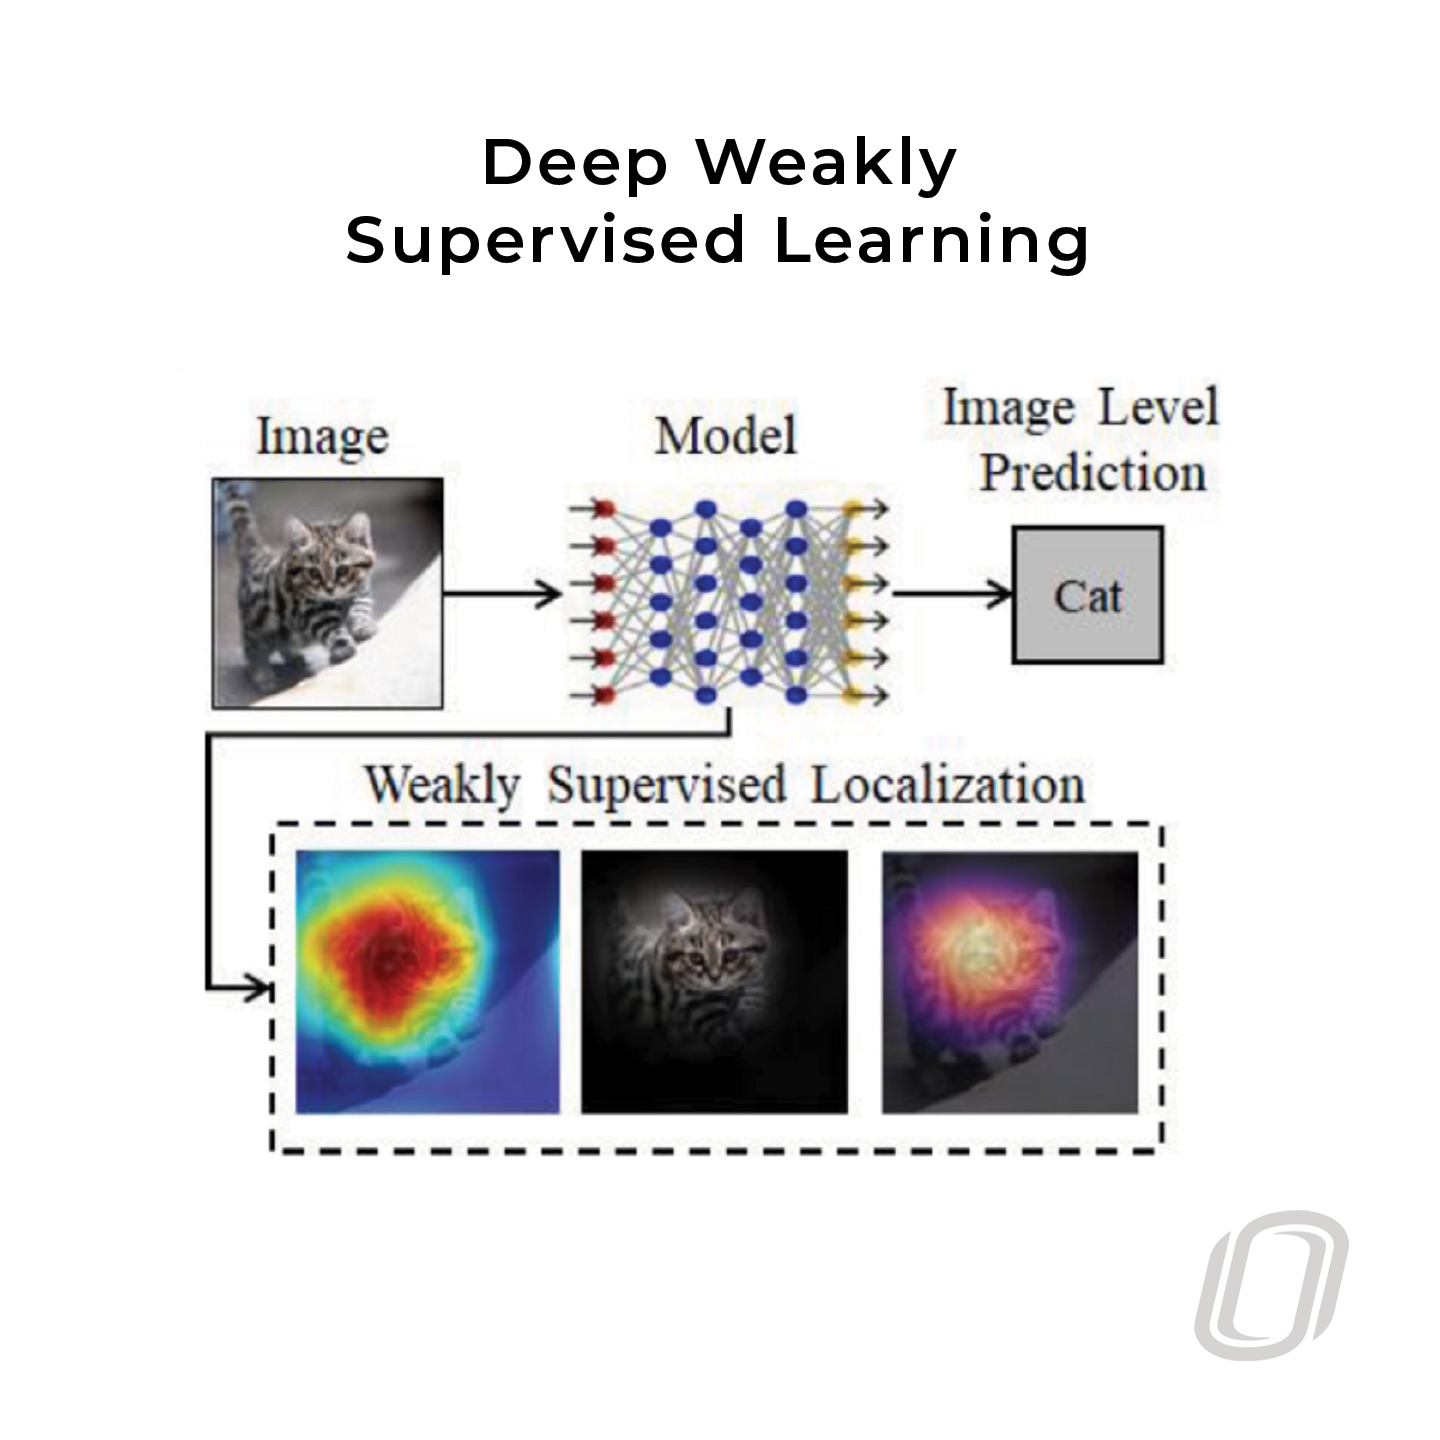 a diagram that visually represents deep weakly supervised learning with AI 